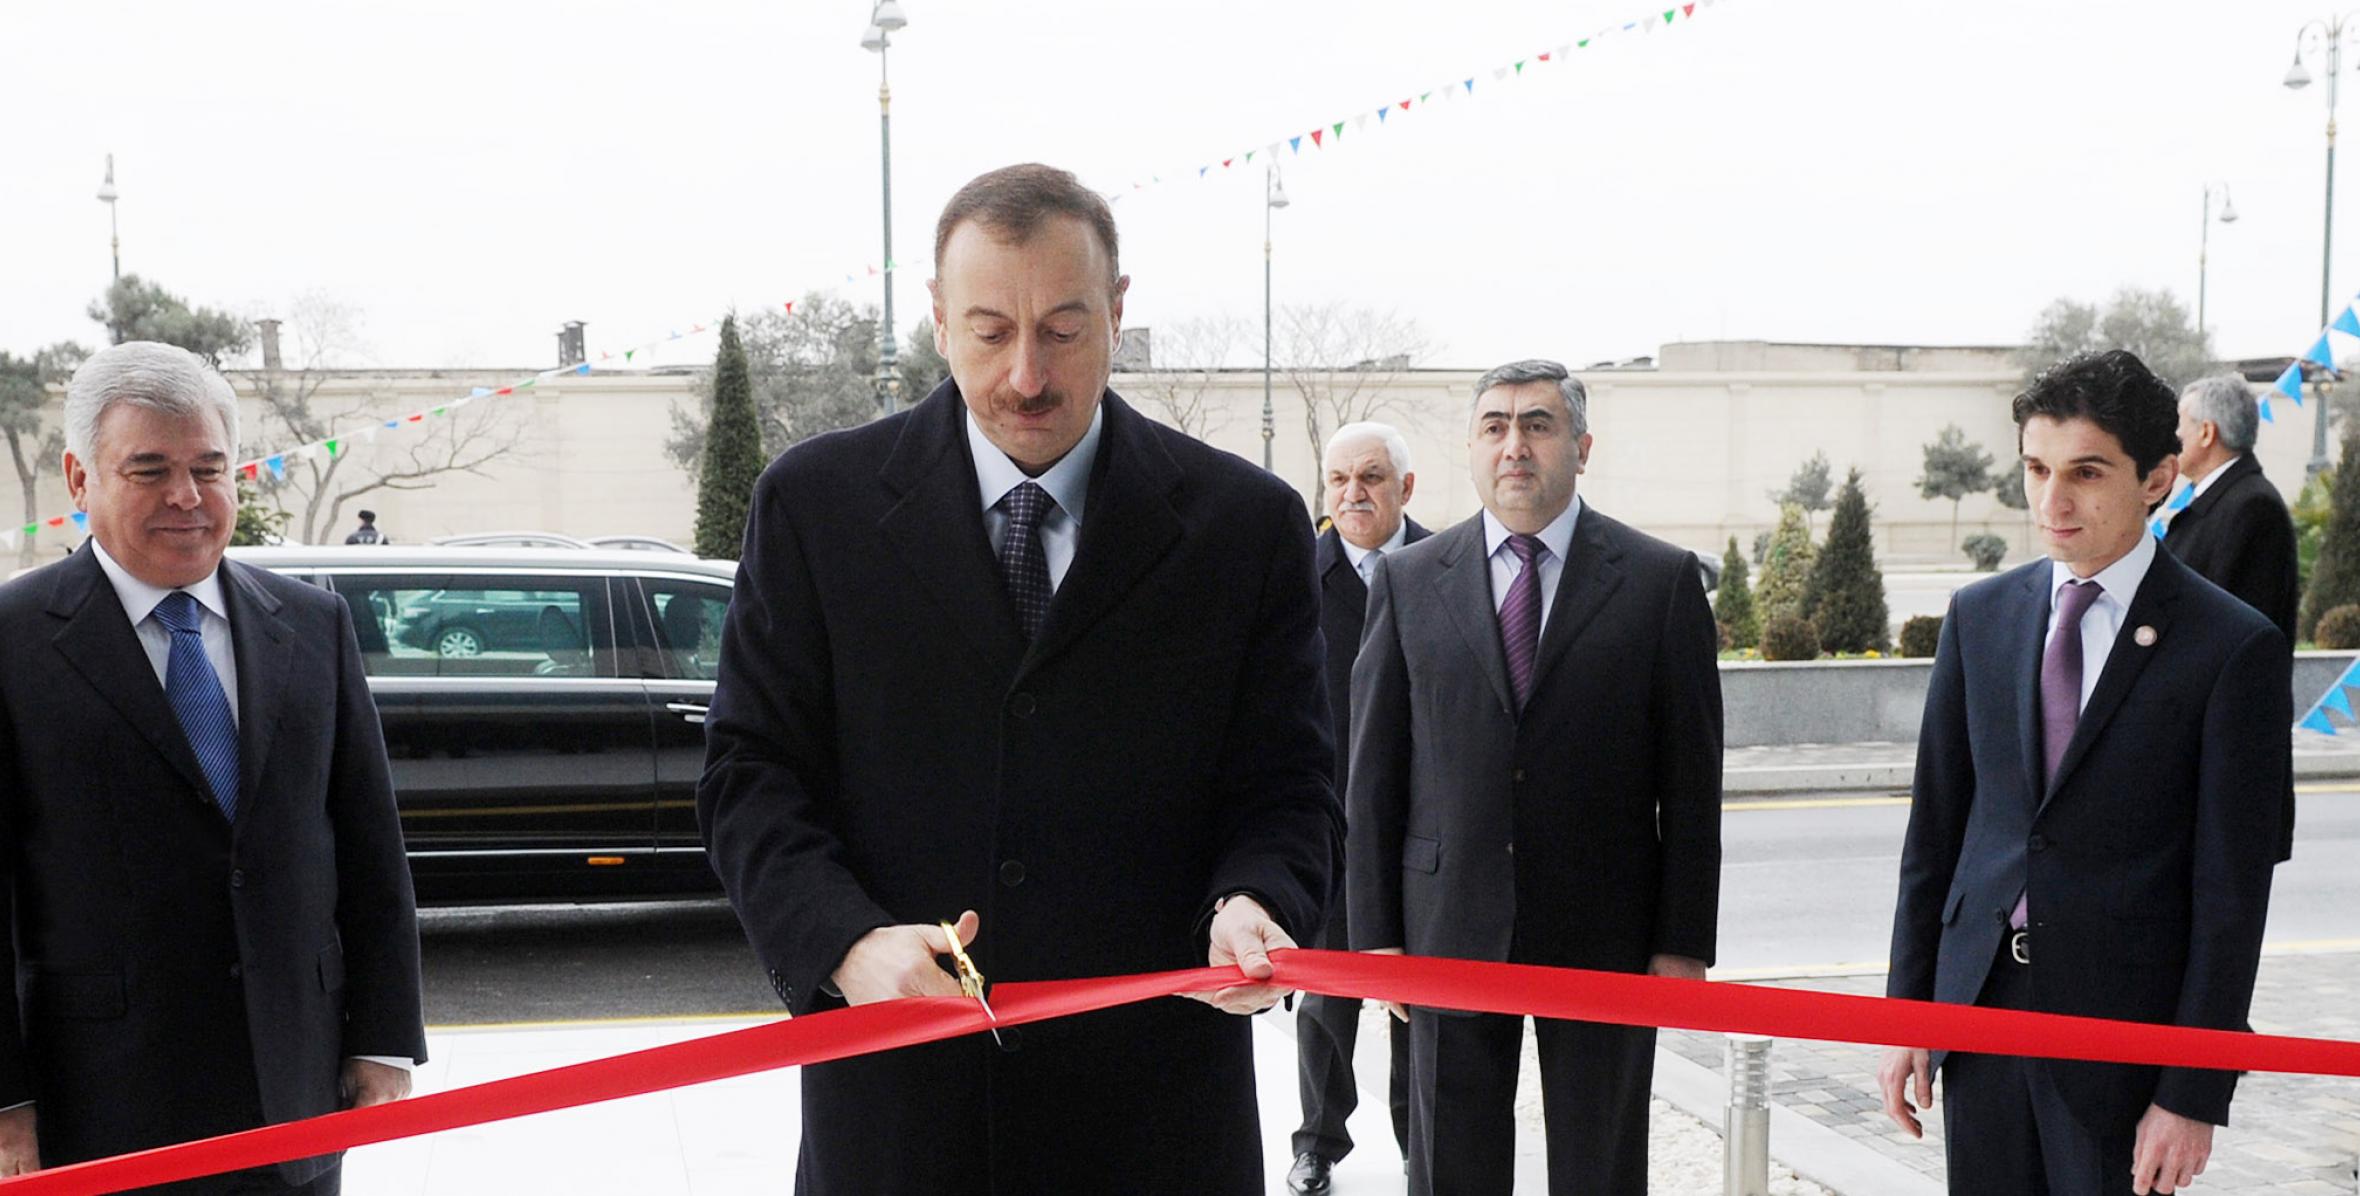 Ilham Aliyev attended the opening of the Intelligent Traffic Management Center in Baku